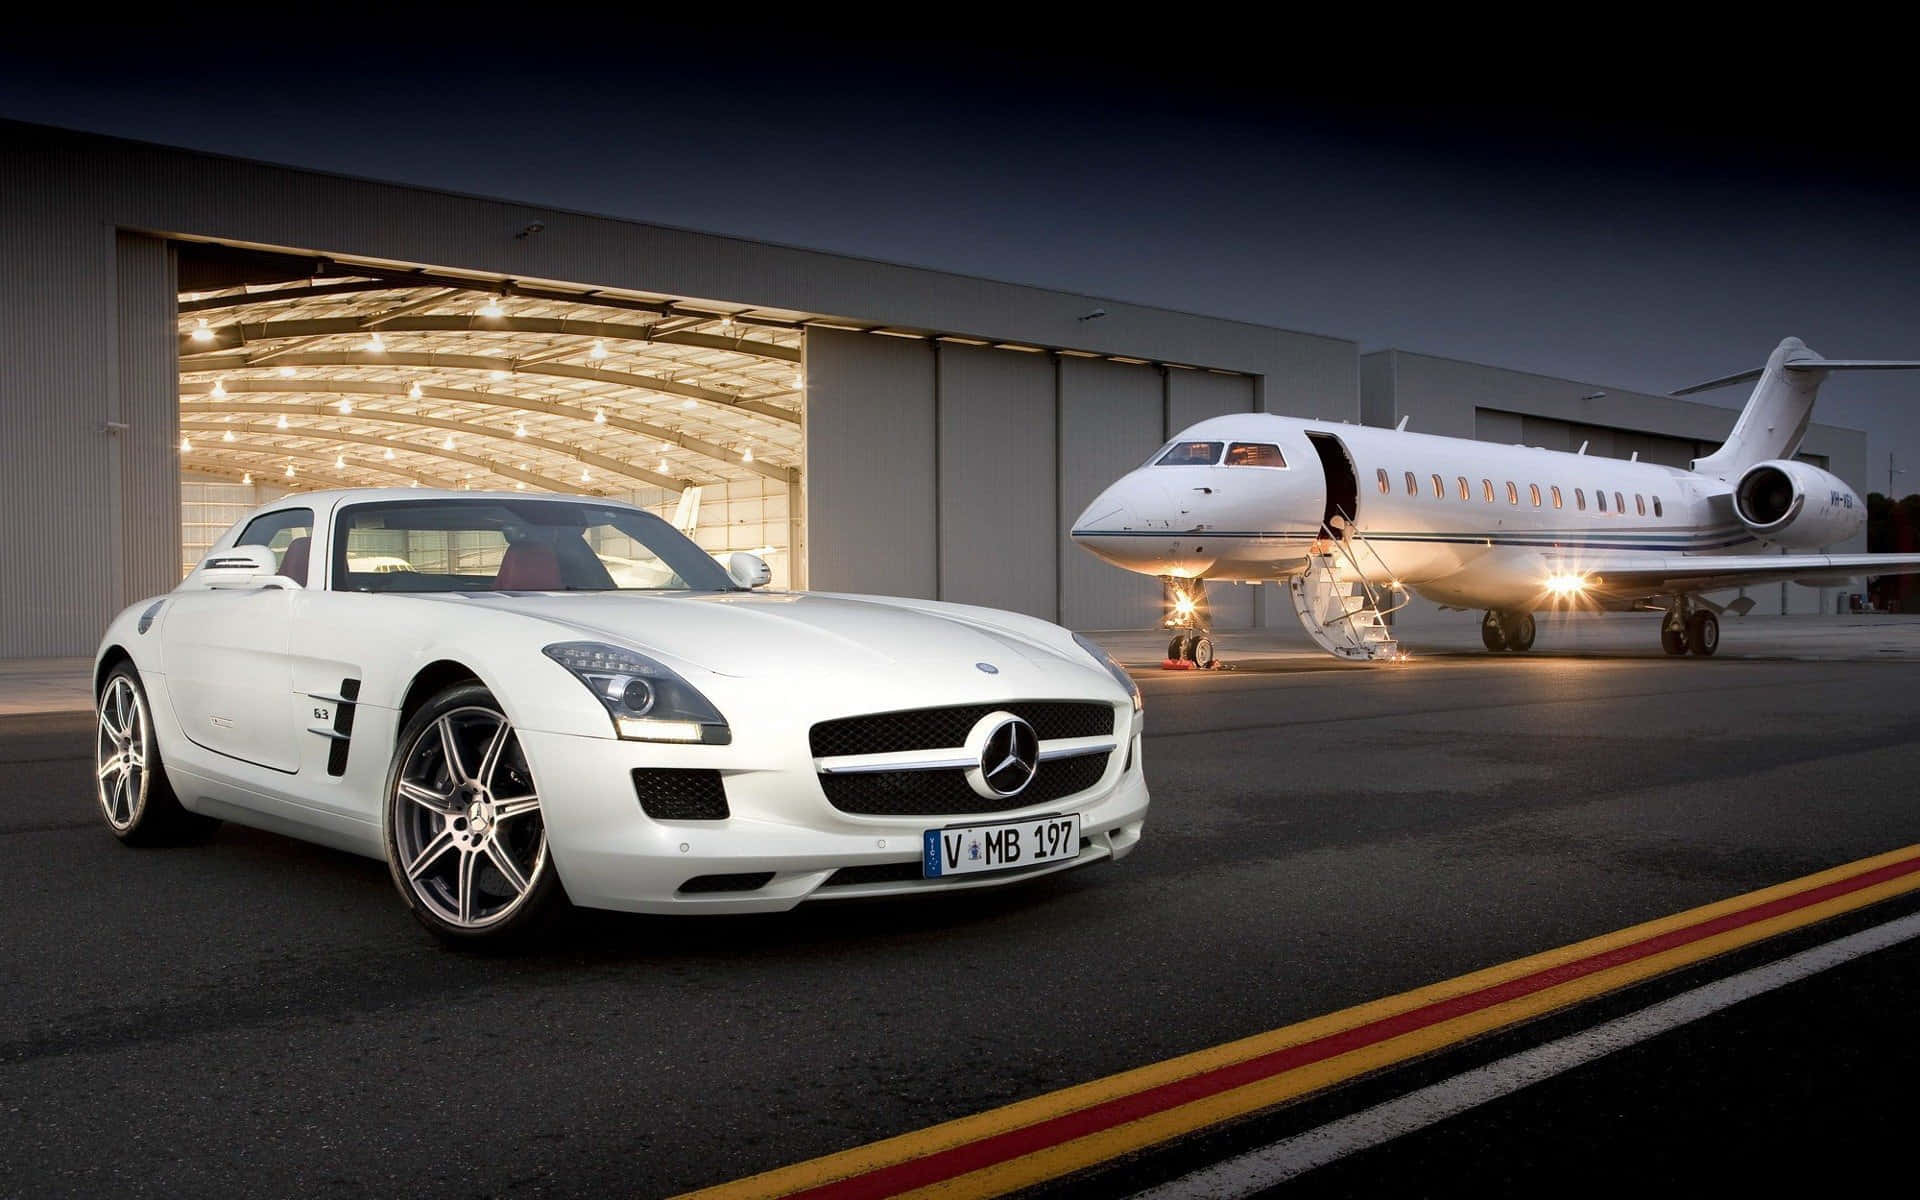 Private Jet With Mercedes Wallpaper